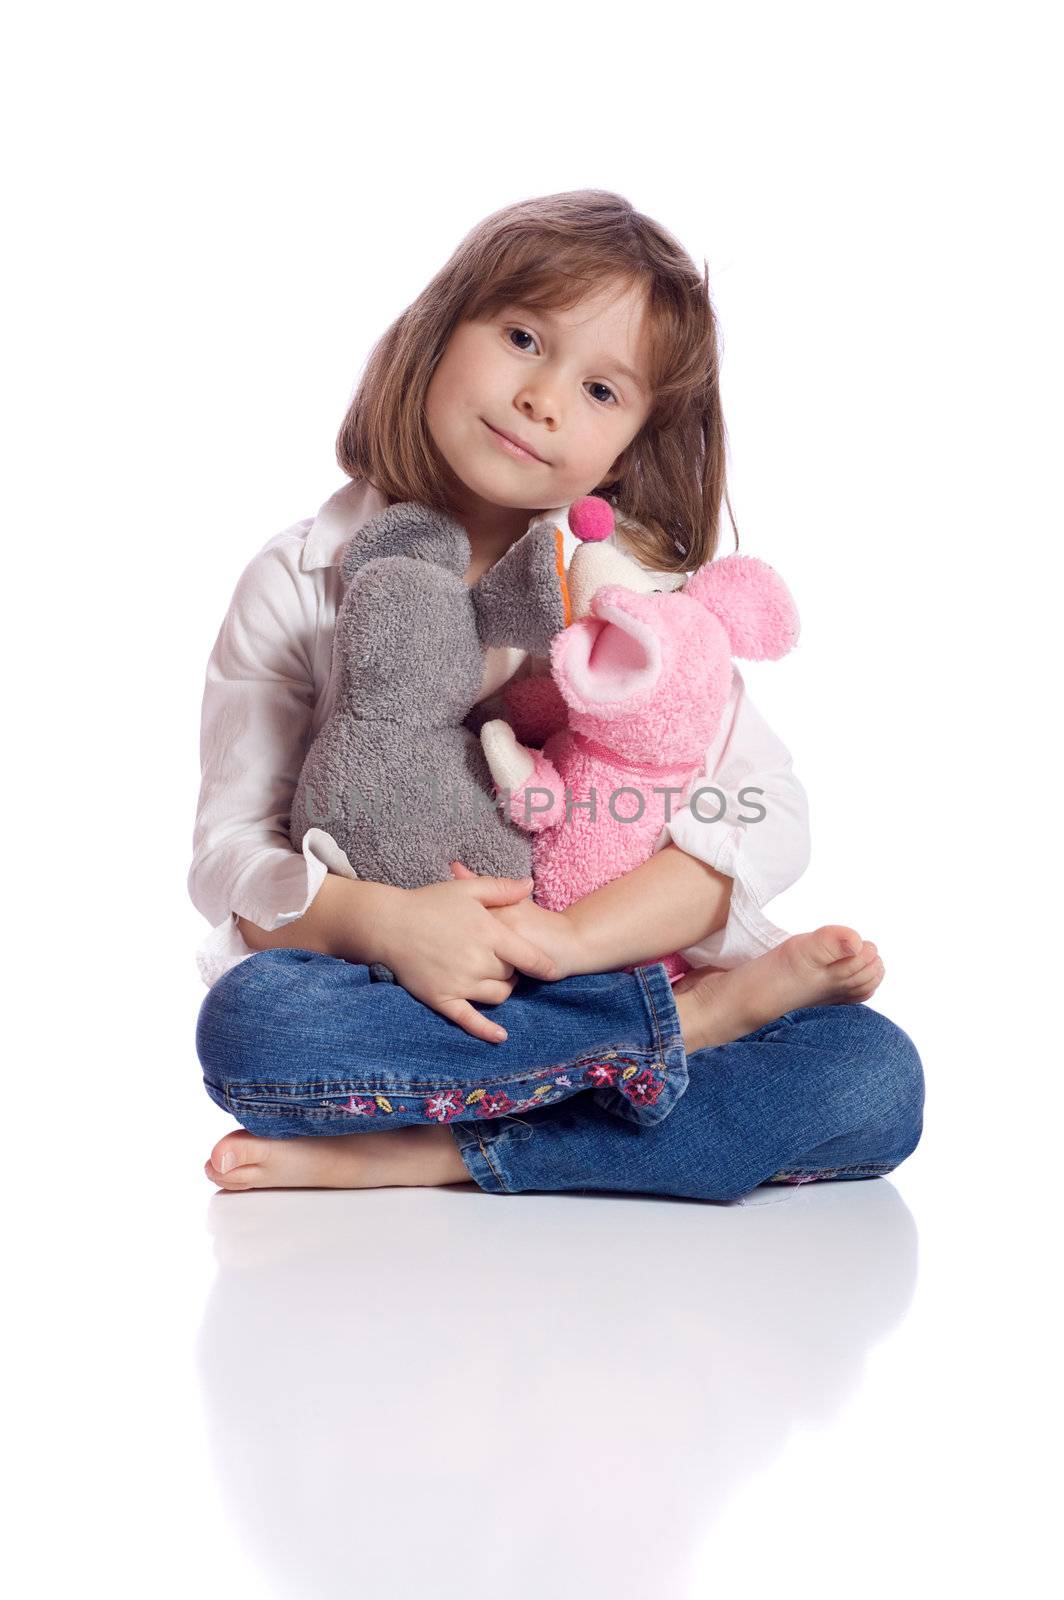 Cute little girl with two teddy